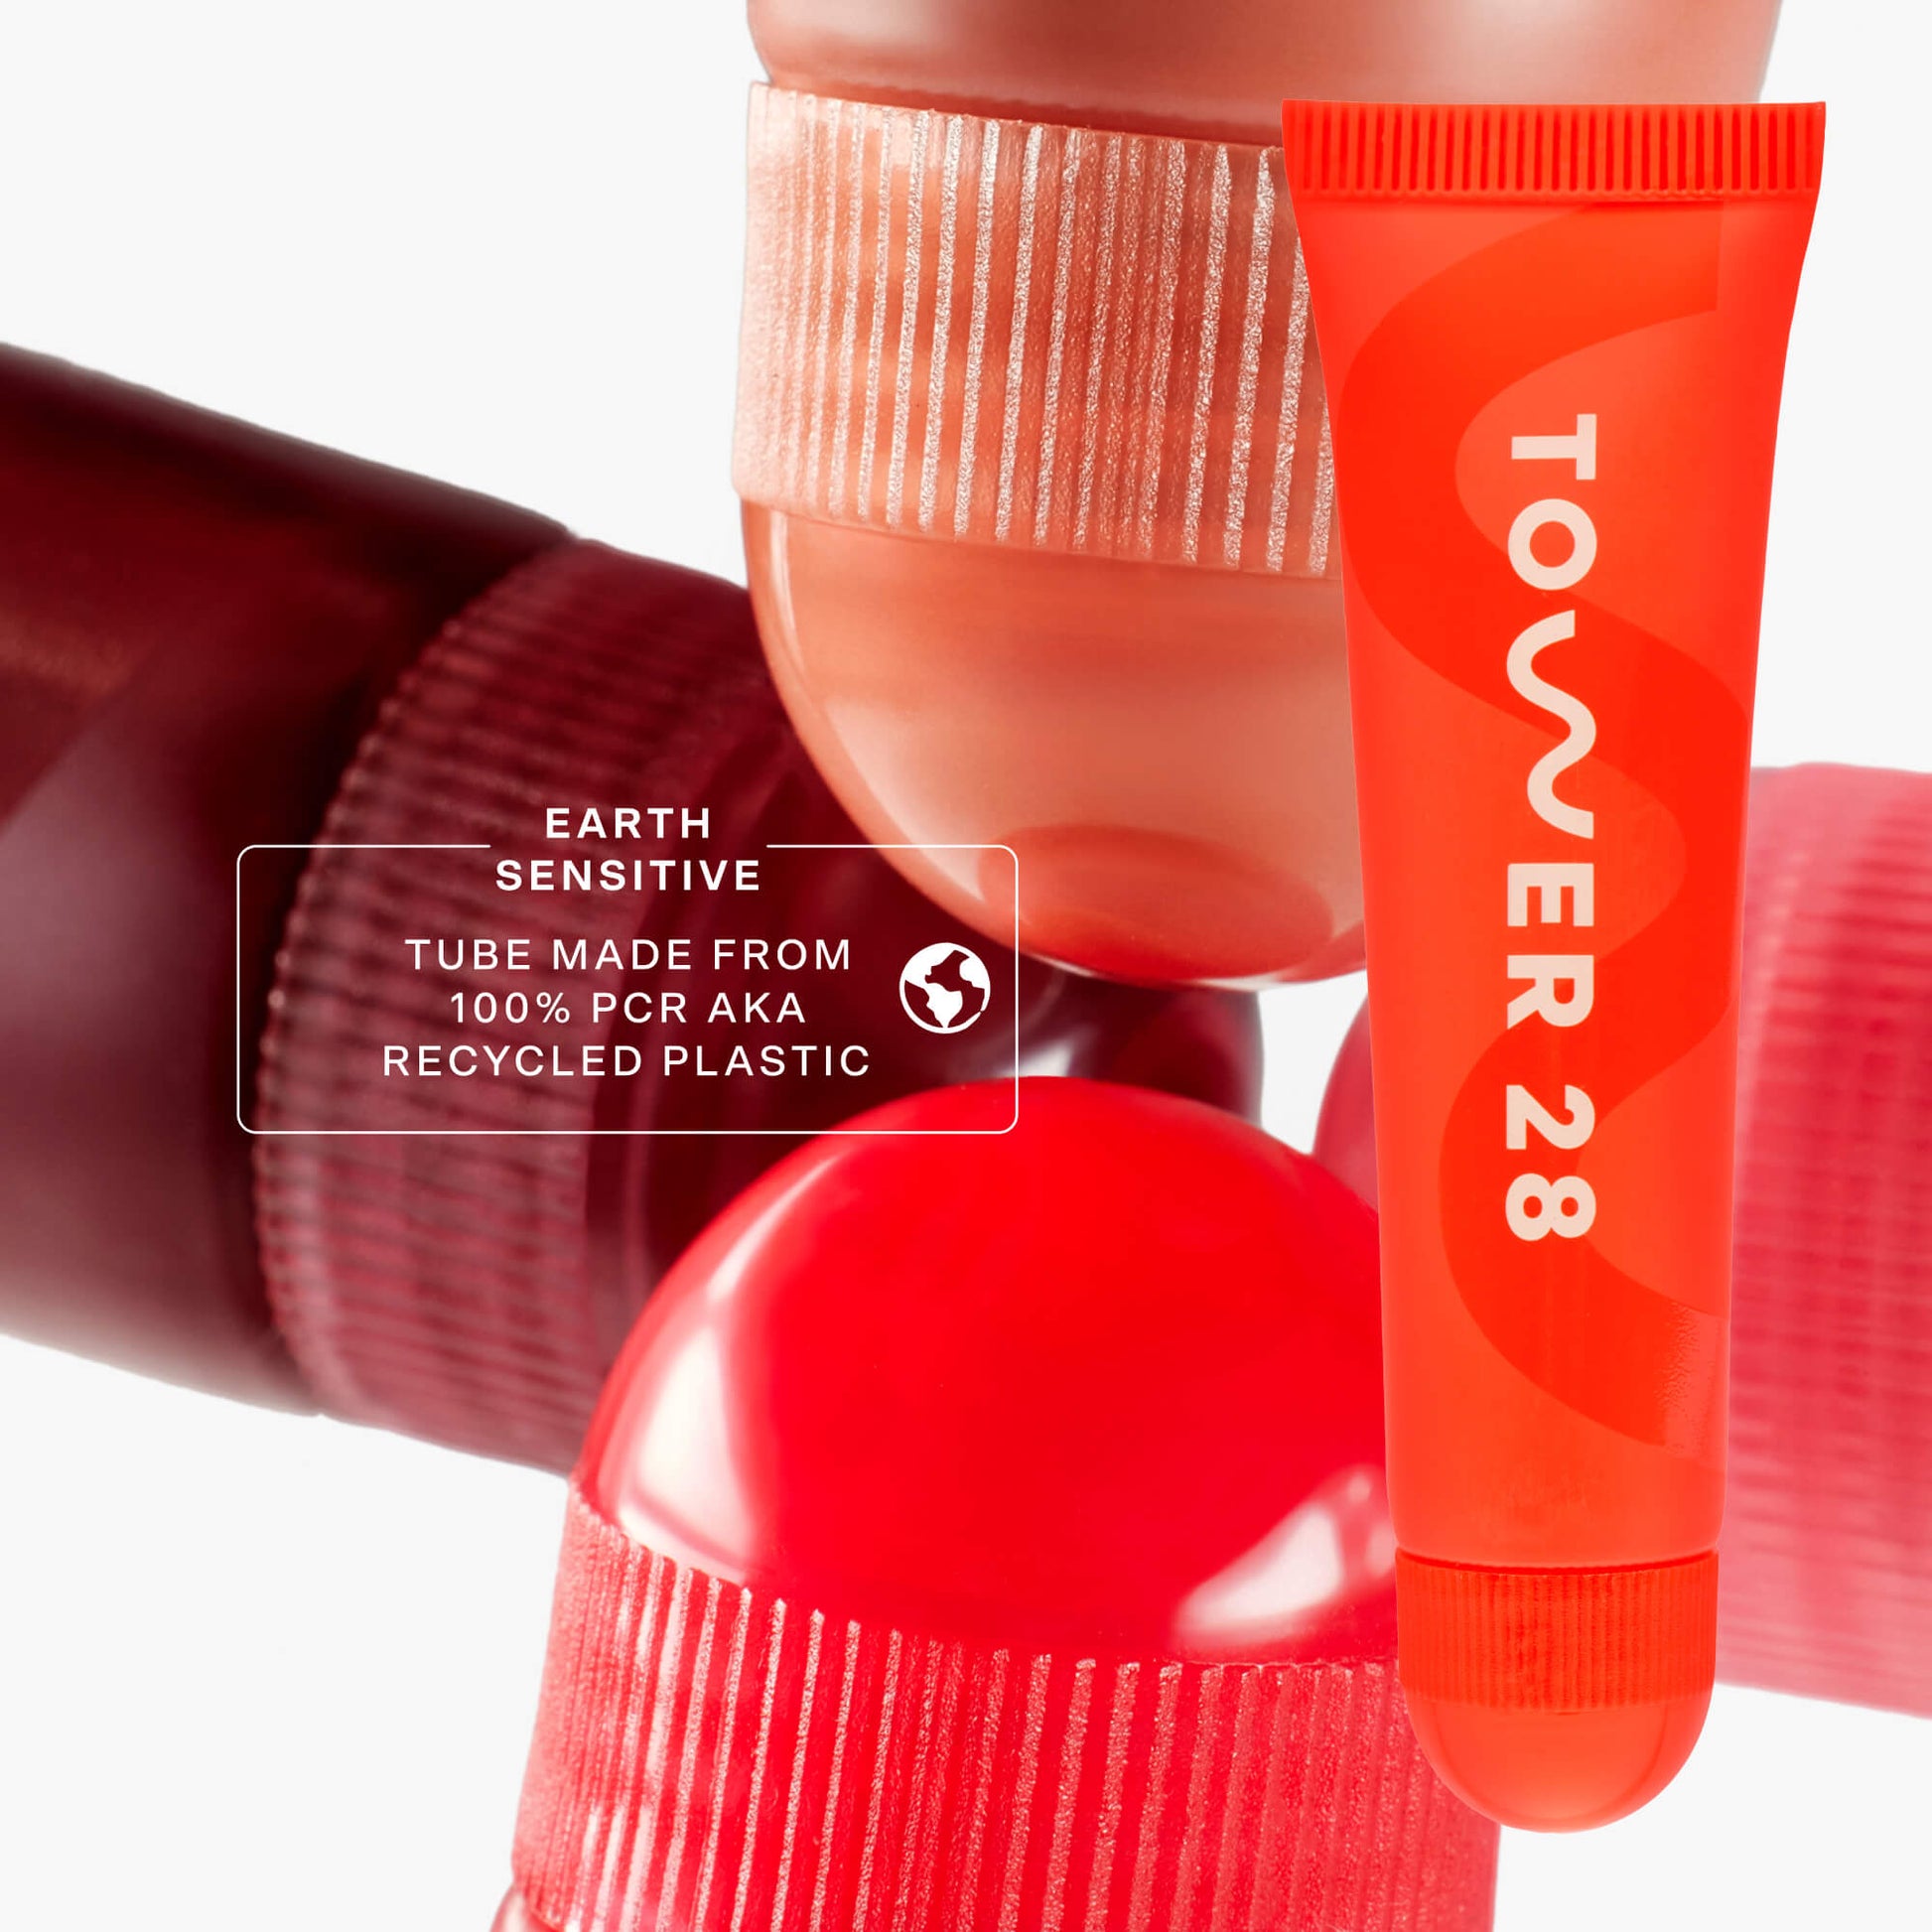 [Tower 28 Beauty LipSoftie™ Lip Treatment in SOS Vanilla has 100% recycled plastic packaging.